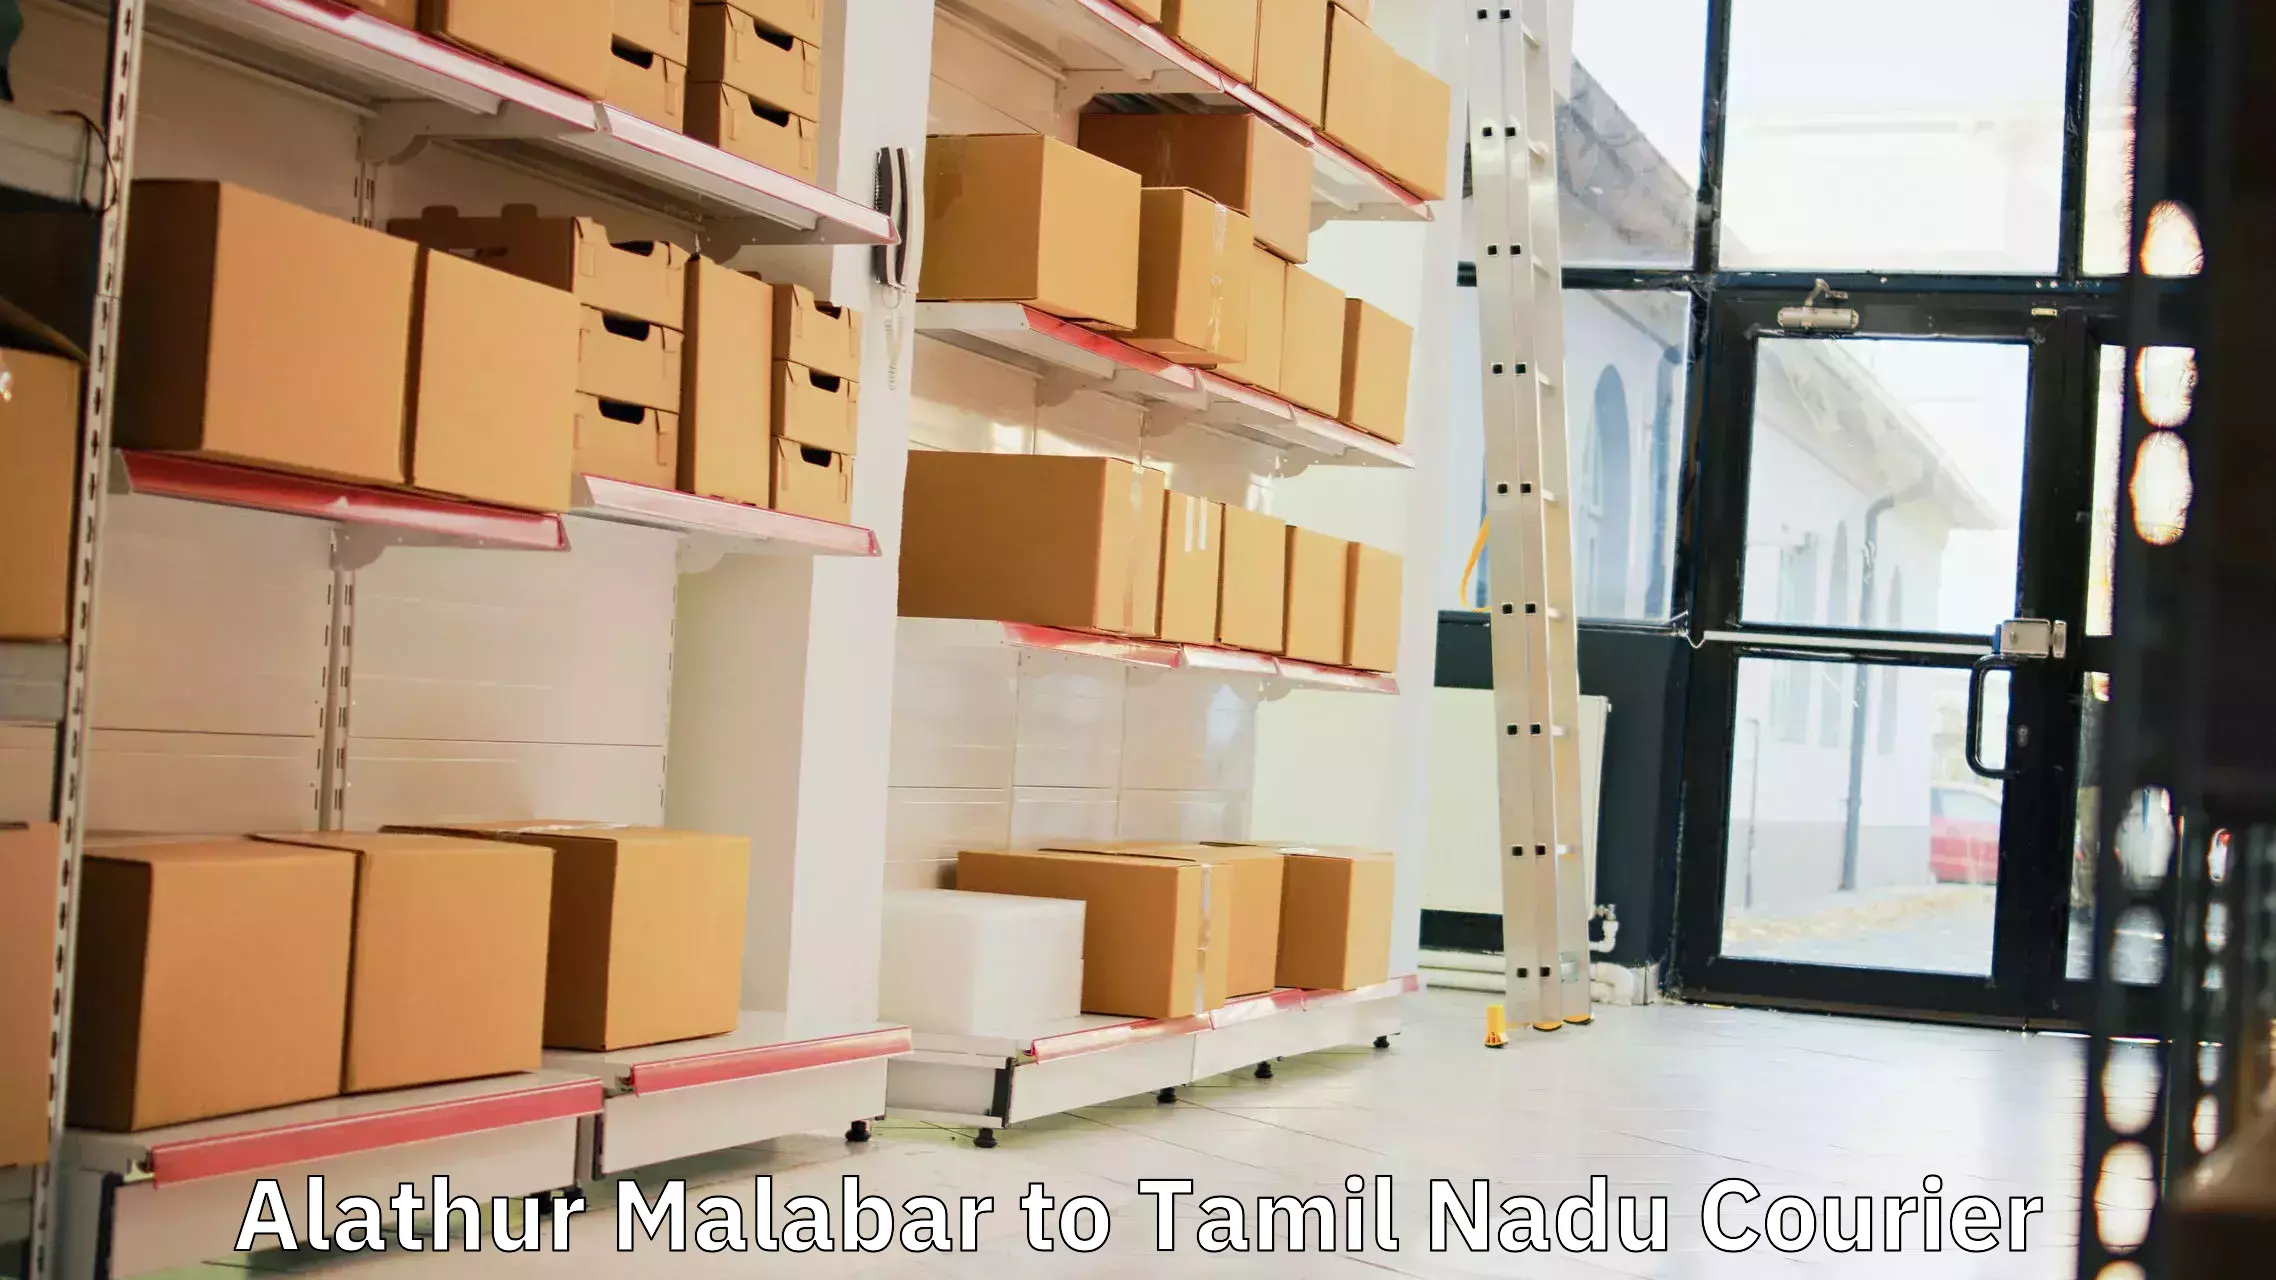 Global delivery options Alathur Malabar to Chennai Port